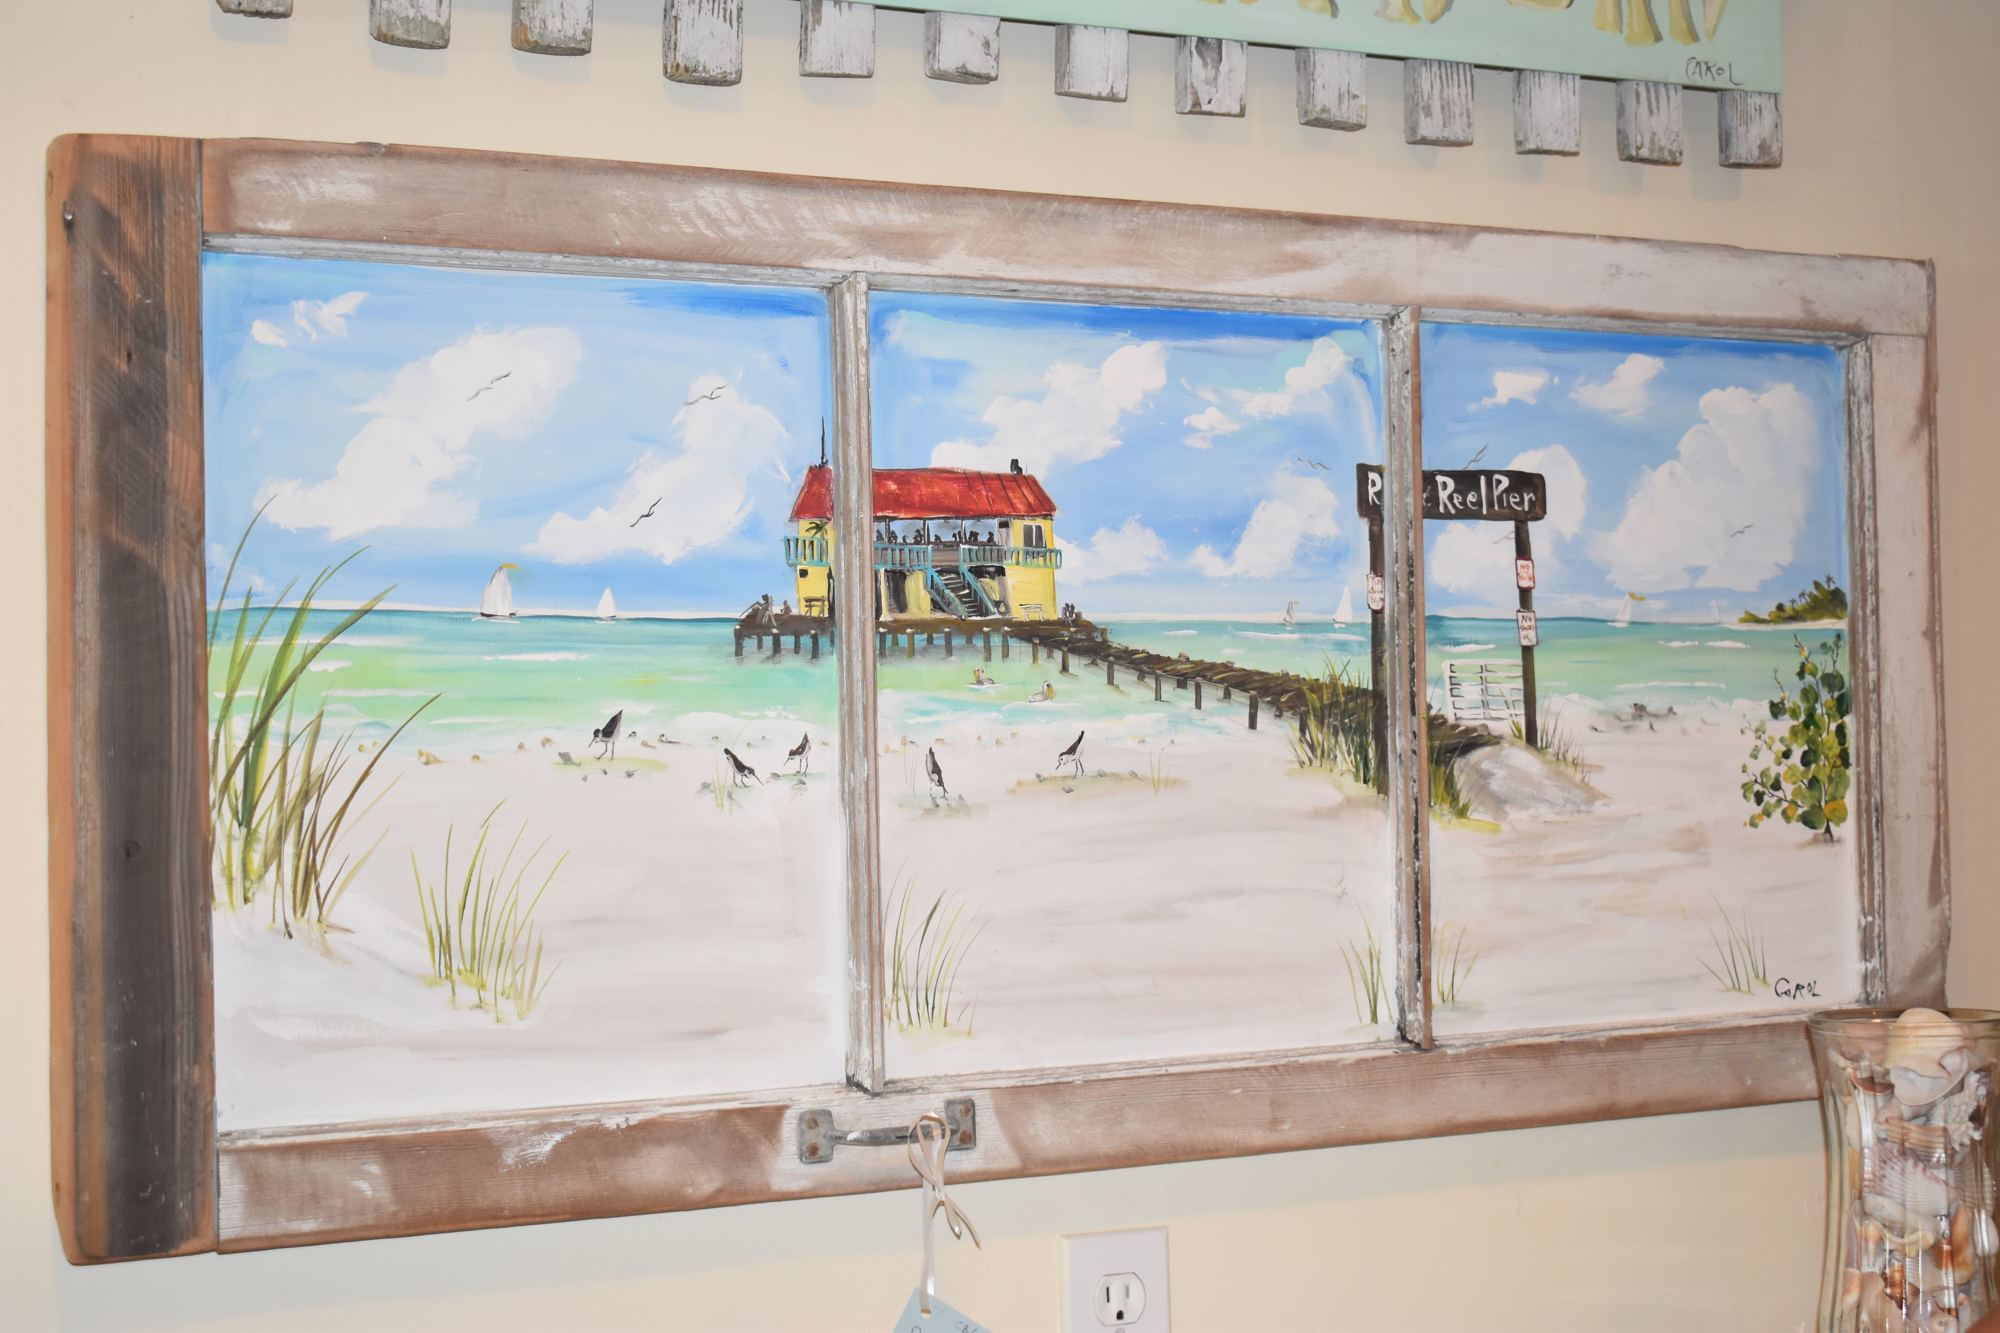 Is that the pier outside? Roman painted this scene on an old window frame.